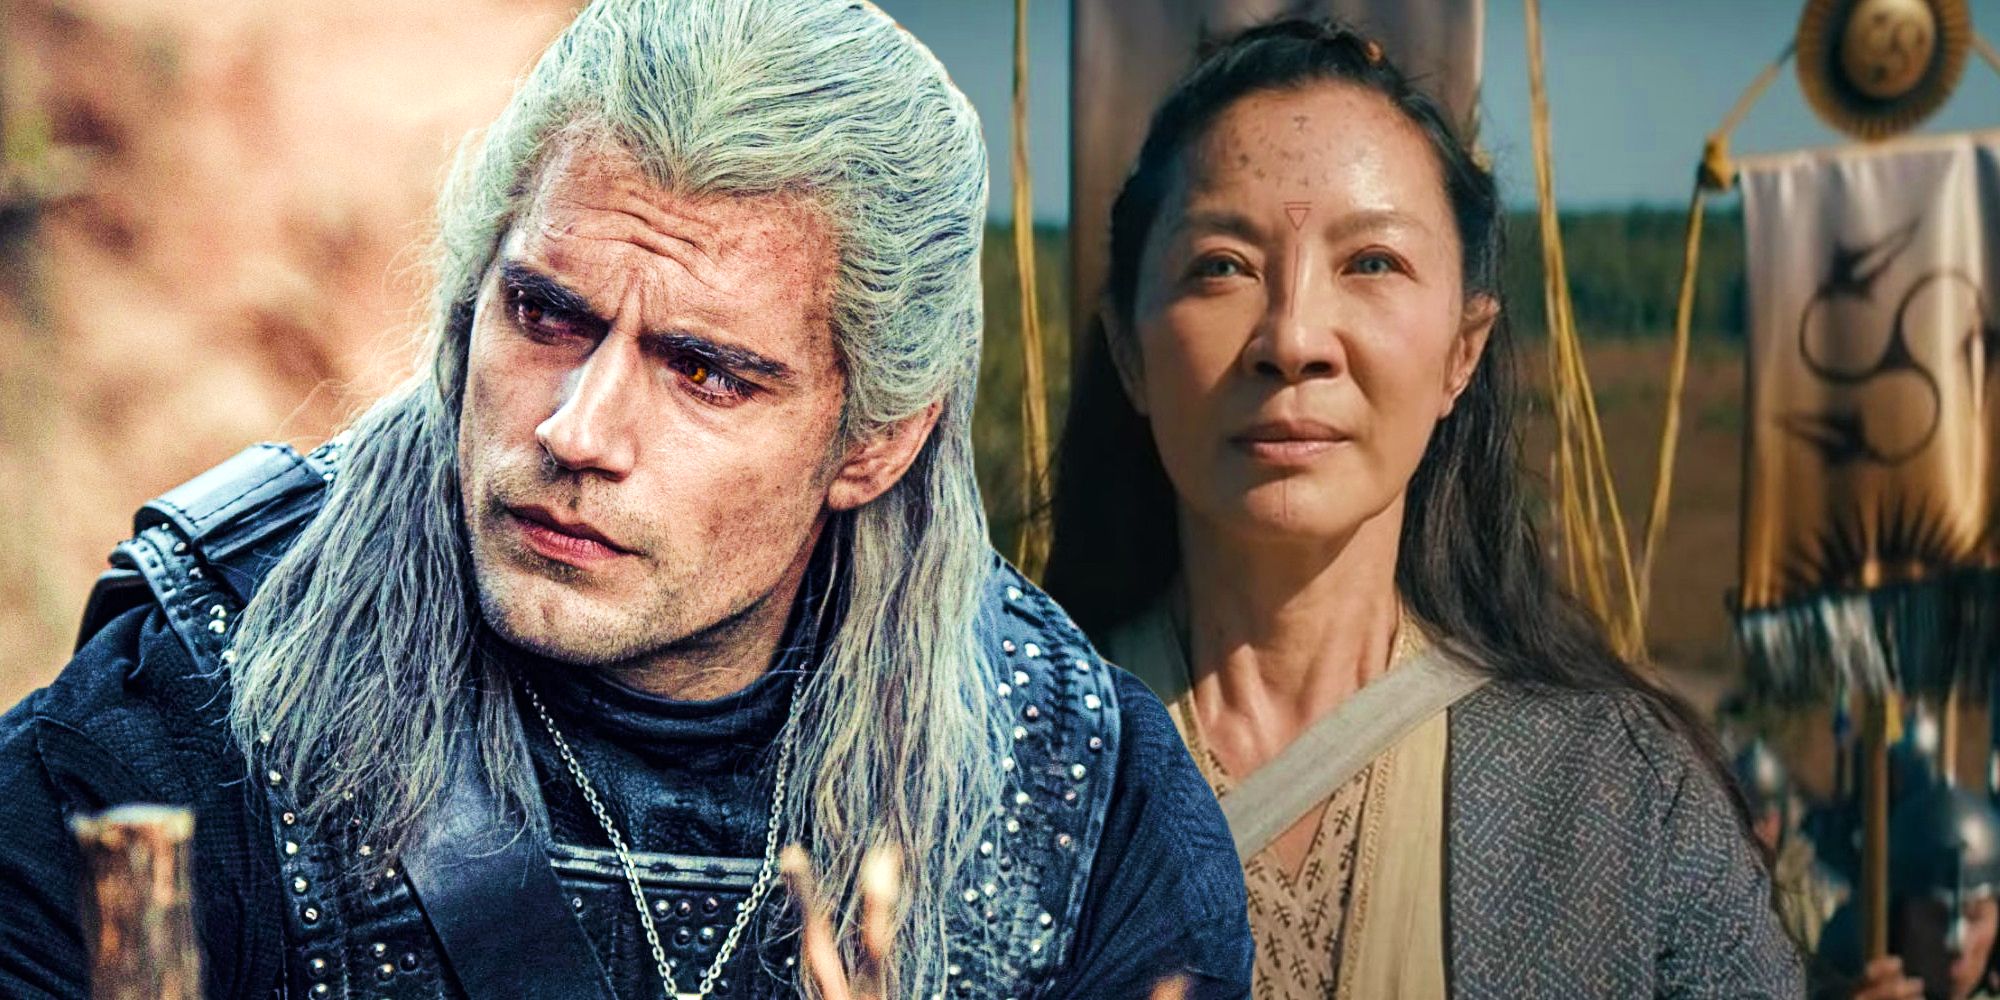 Henry Cavill as Geralt and Michelle Yeoh as Scian